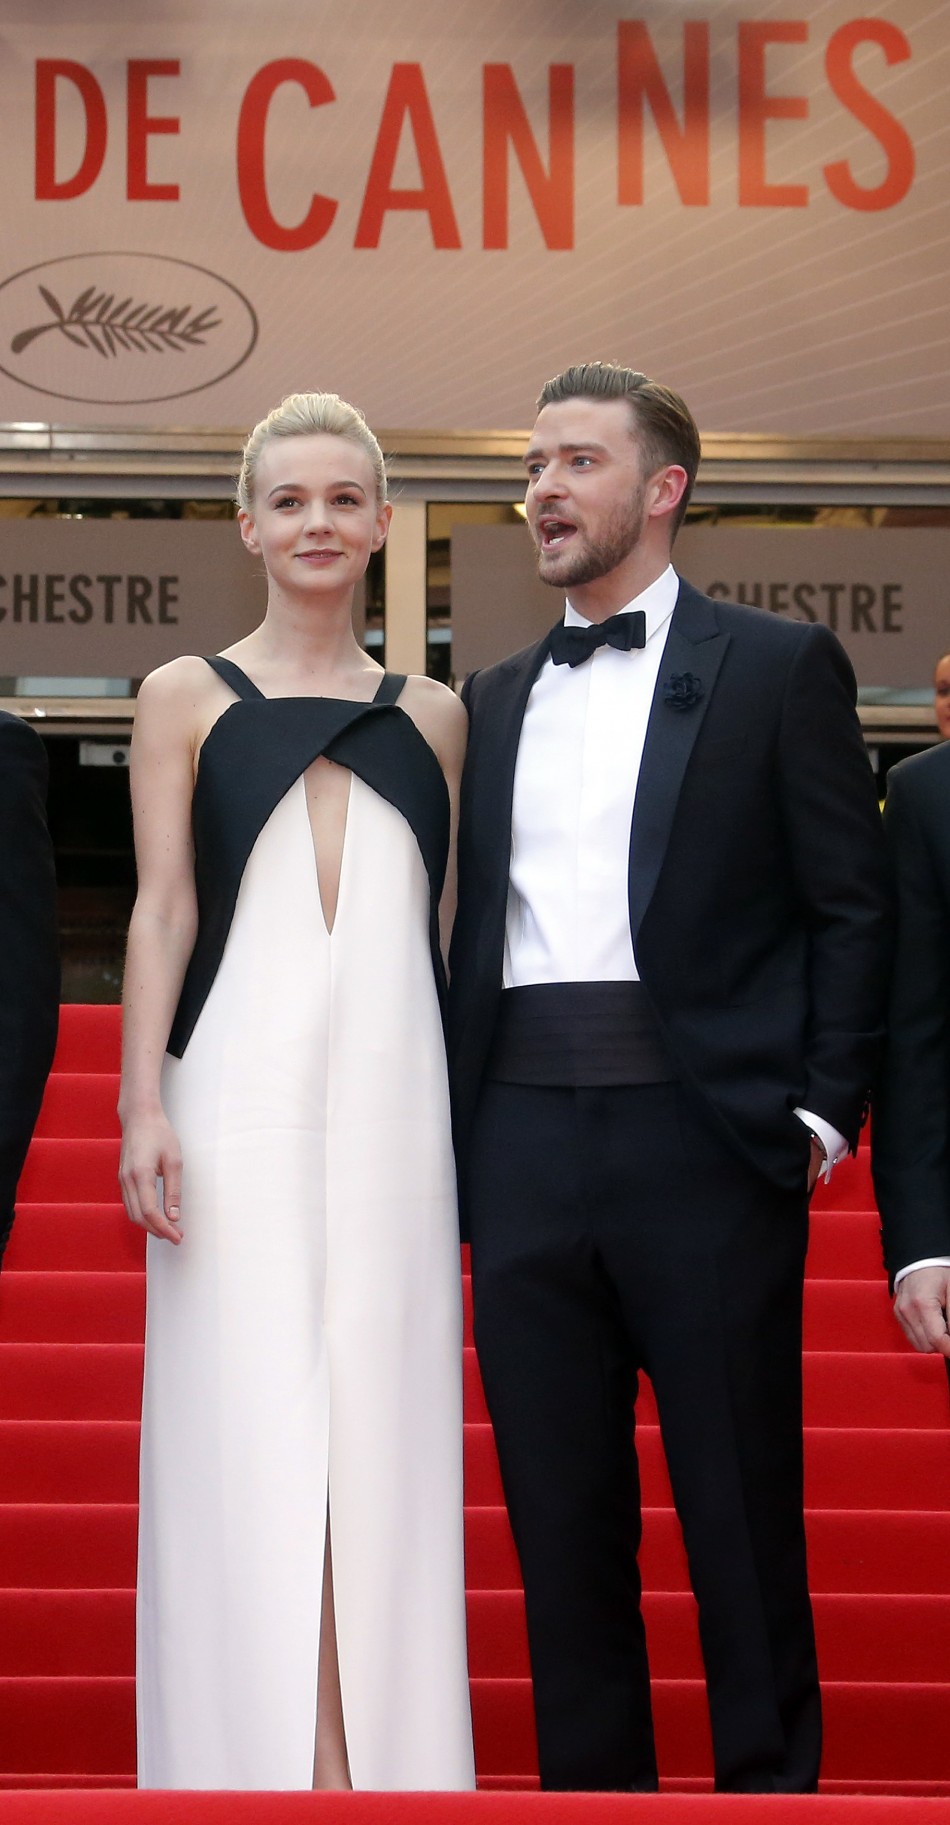 Cast members Carey Mulligan L and Justin Timberlake pose on the red carpet as they arrive for the screening of the film Inside Llewyn Davis in competition during the 66th Cannes Film Festival in Cannes May 19, 2013.